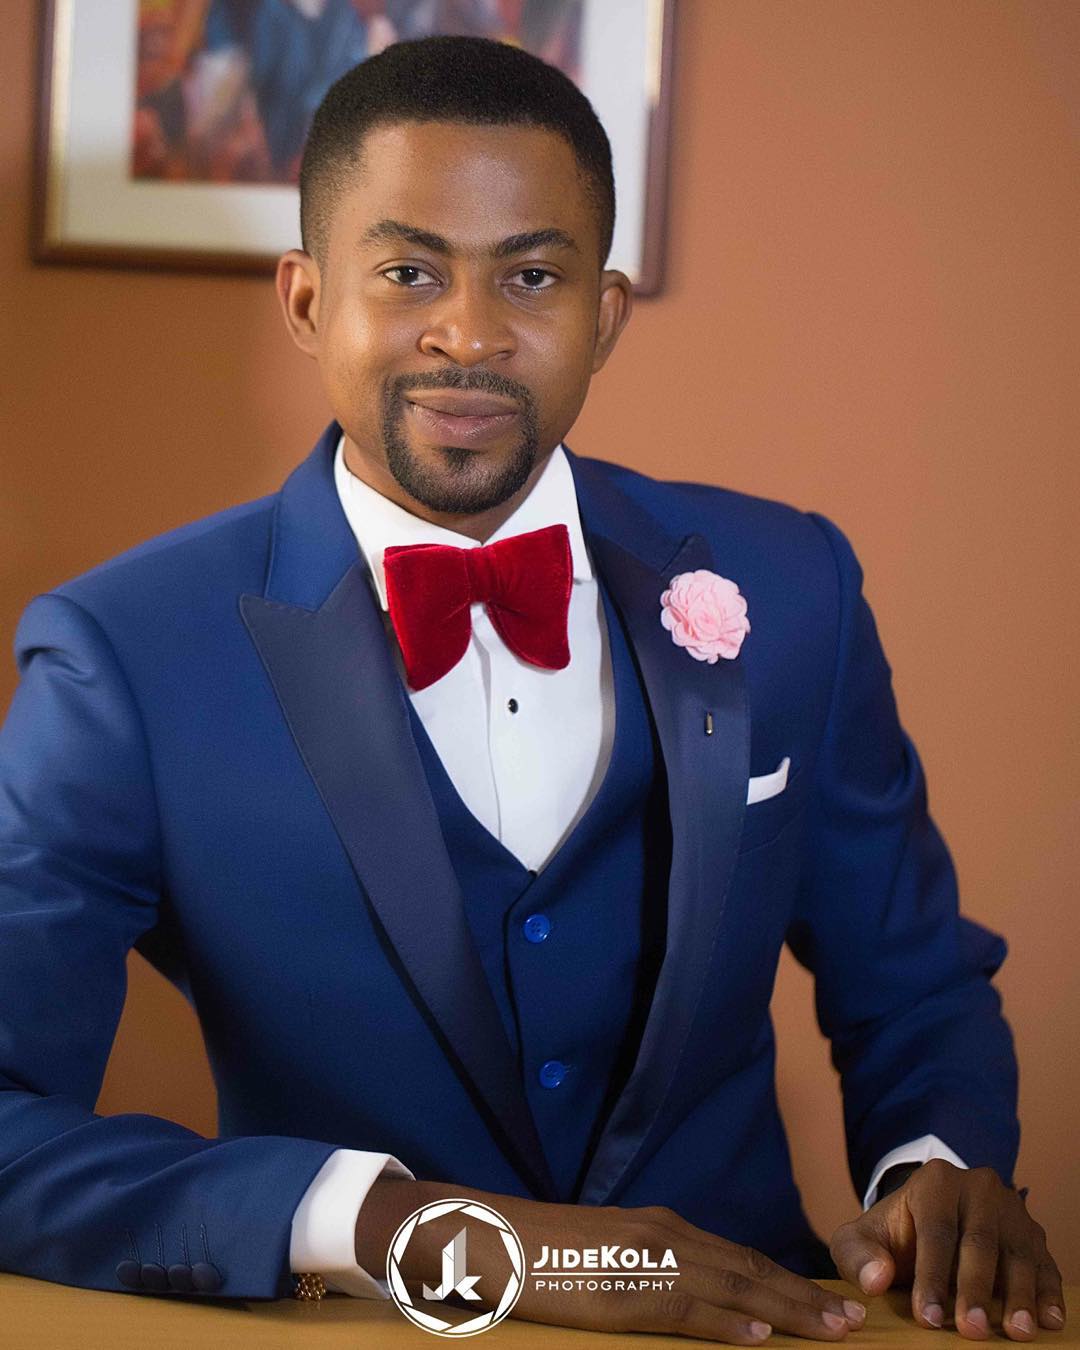 8 Different Styles Of The Blue Tuxedo For The Groom - Fashion - Nigeria